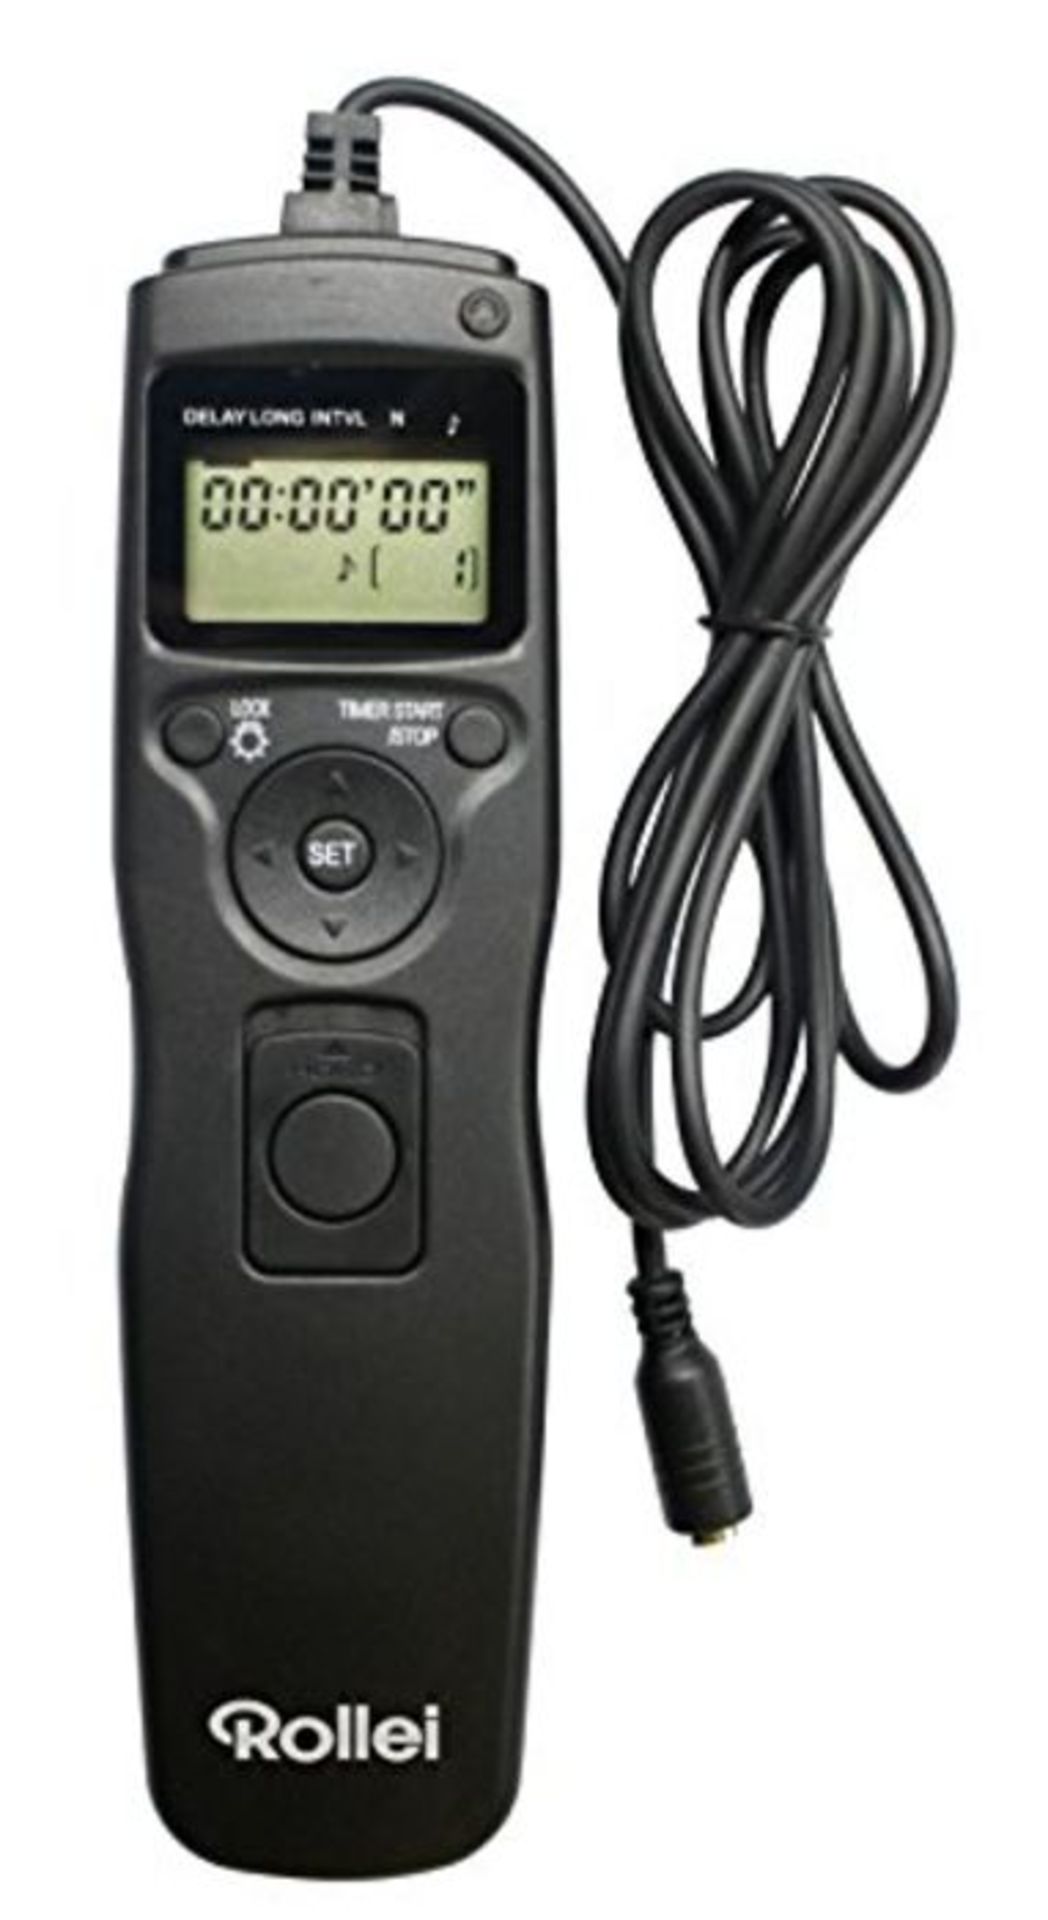 Rollei Cable Remote Release, Easy To Use, Illuminated LCD Display, Black